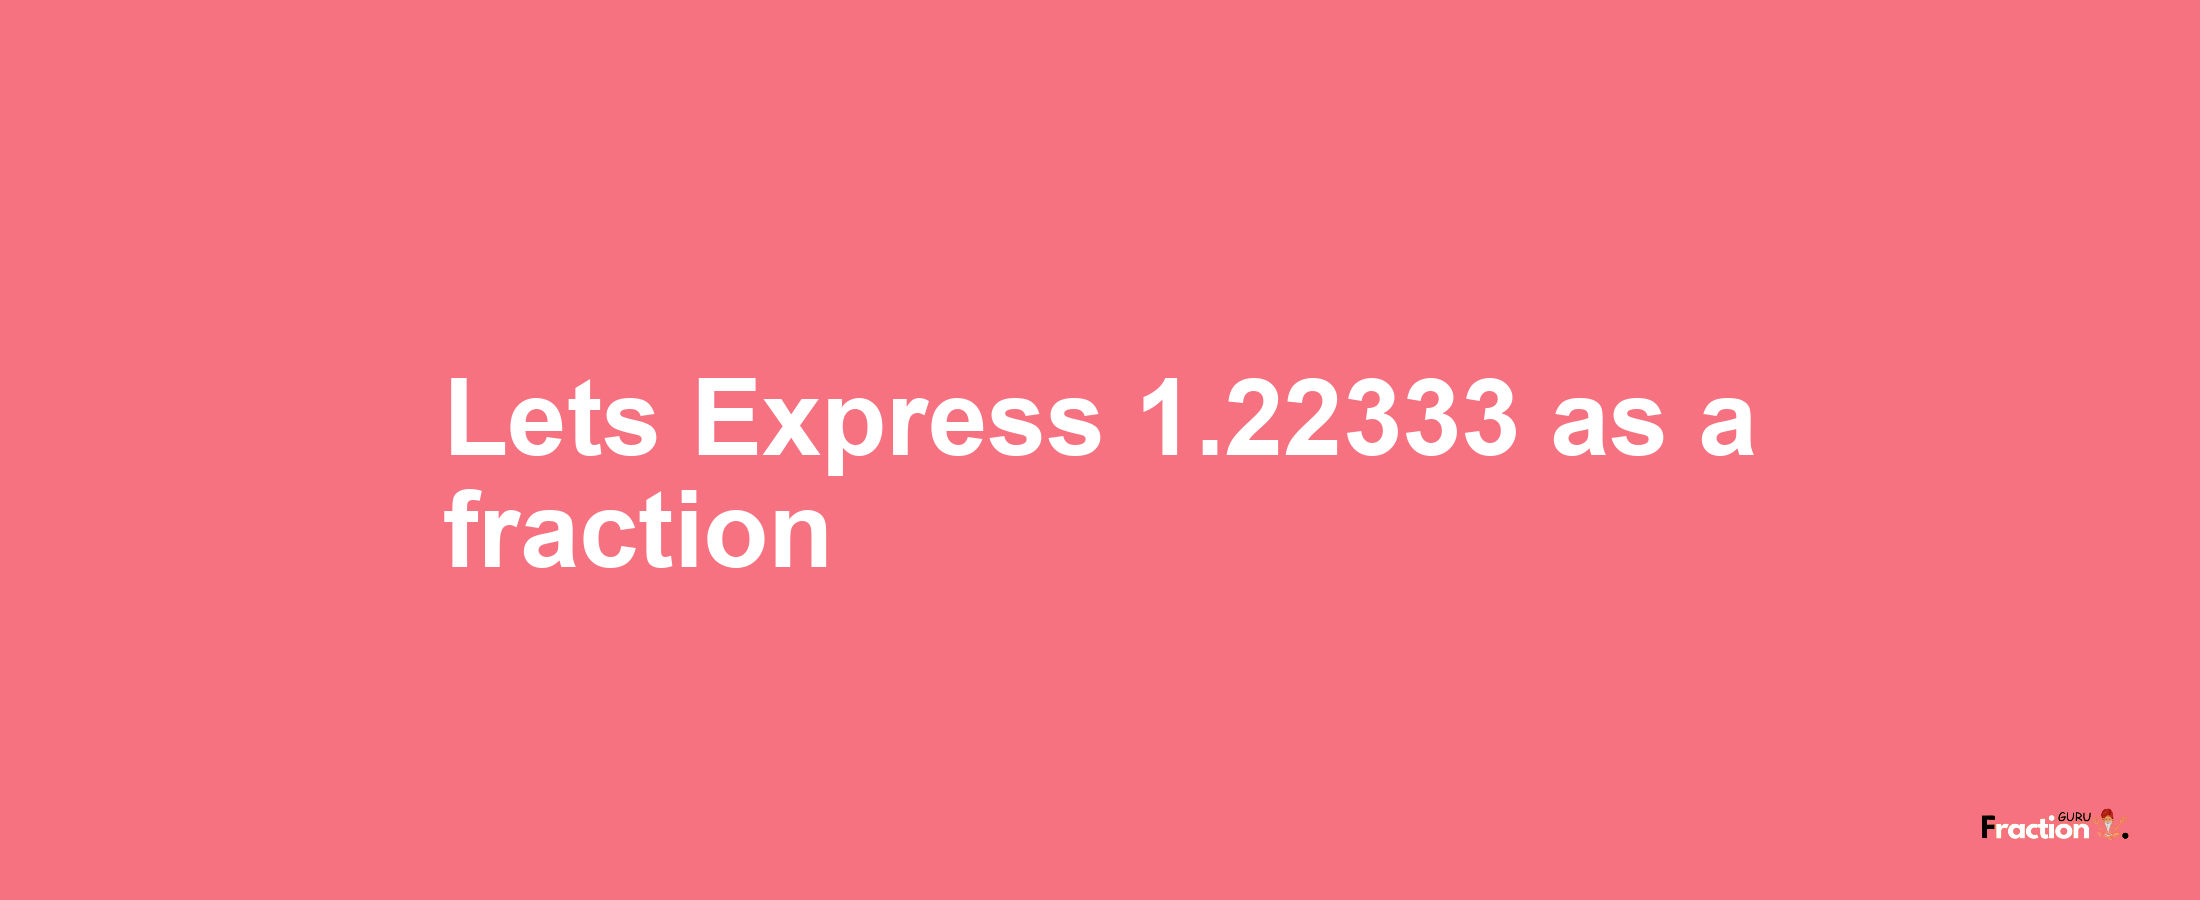 Lets Express 1.22333 as afraction